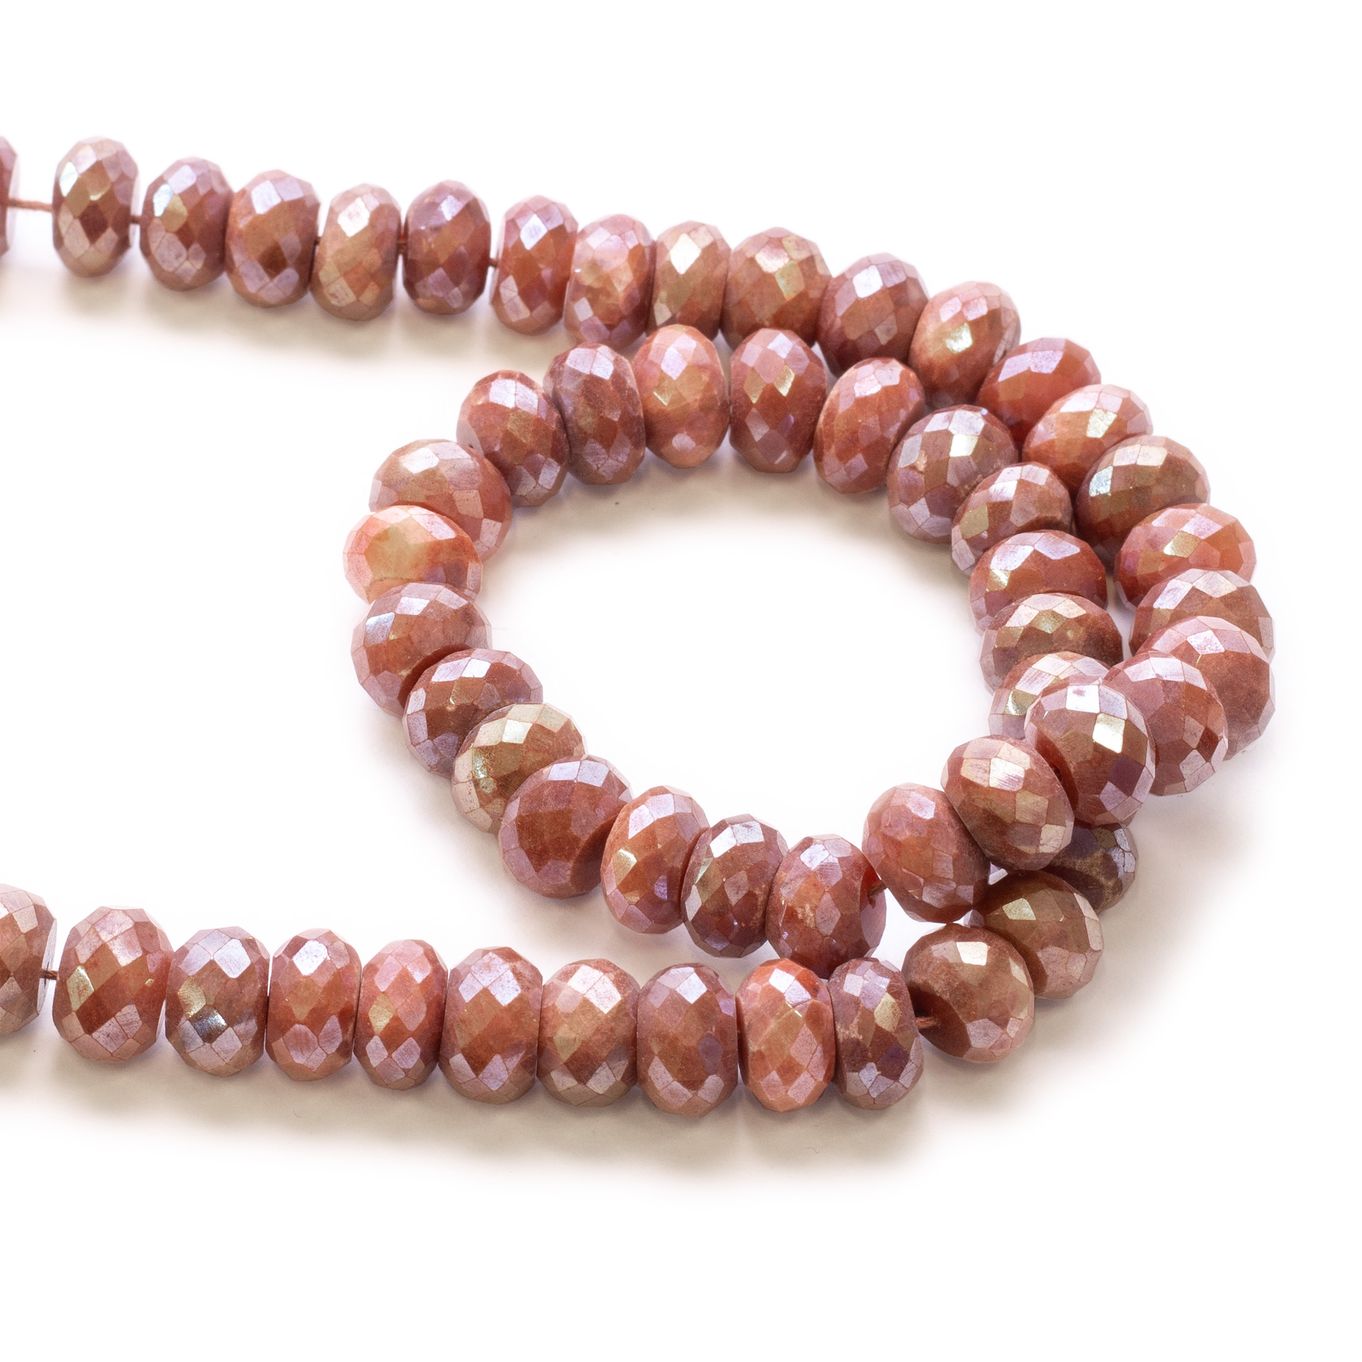 Mystic Coated Bronze Moonstone Faceted Rondelle Beads -  Approx From 8mm